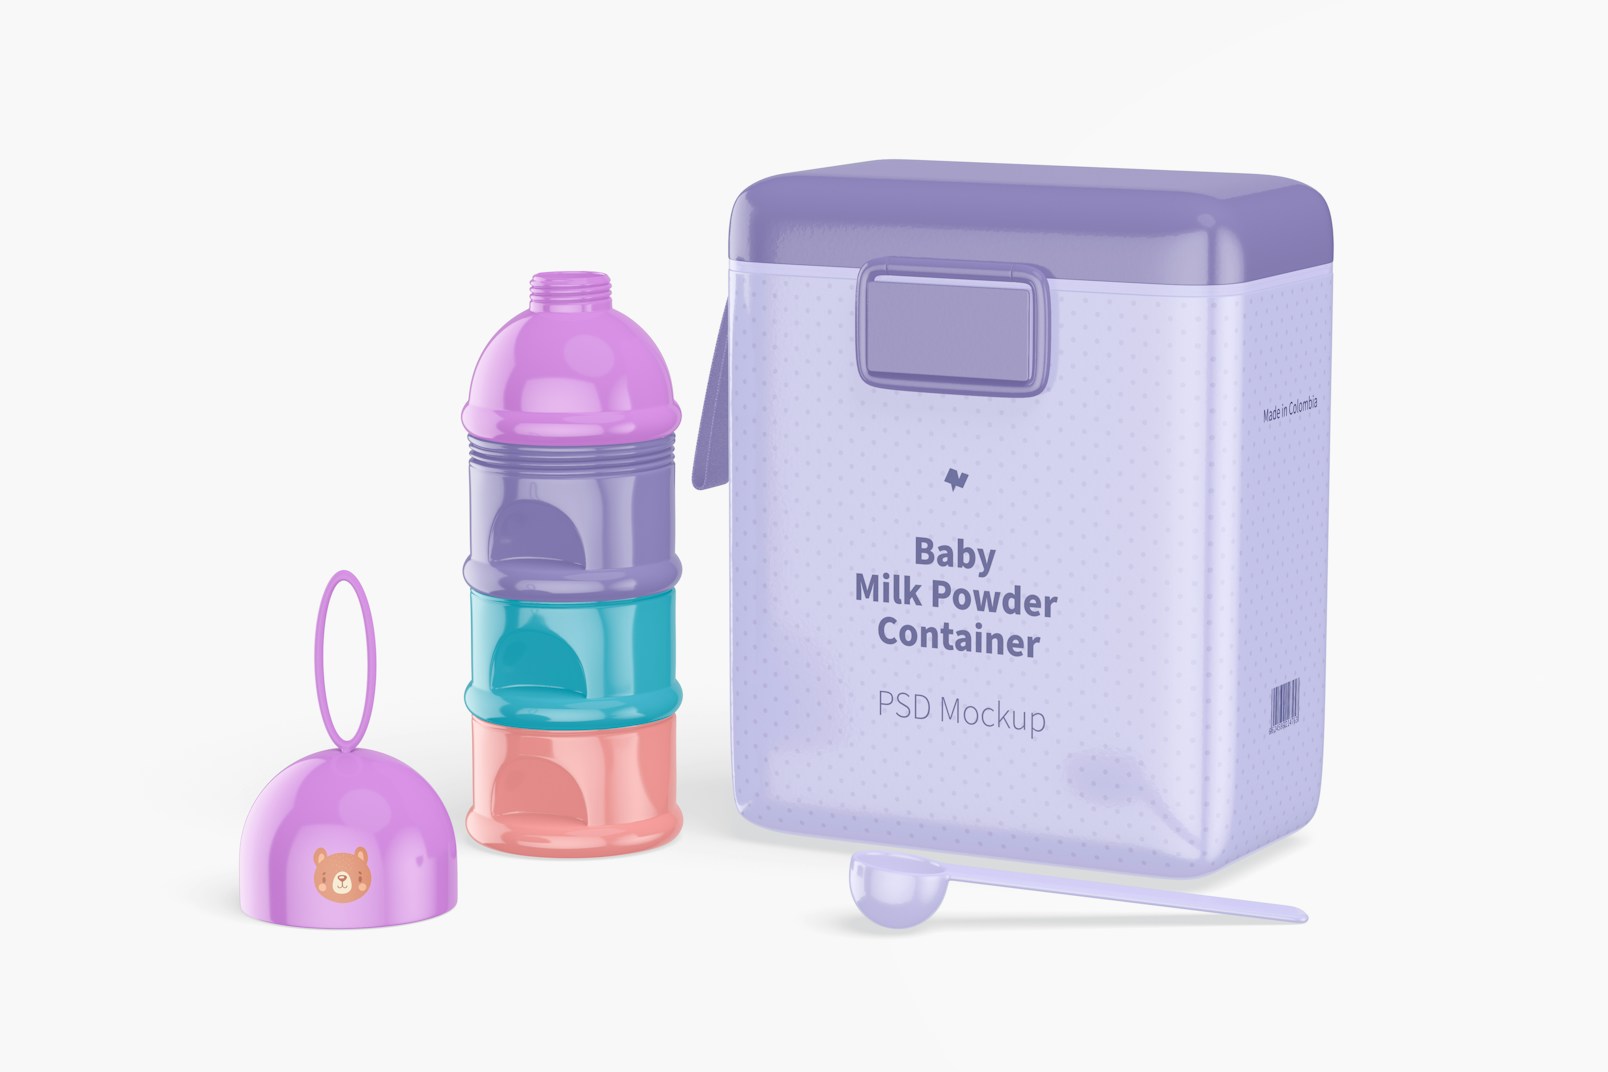 Baby Food Containers Scene Mockup, Right View